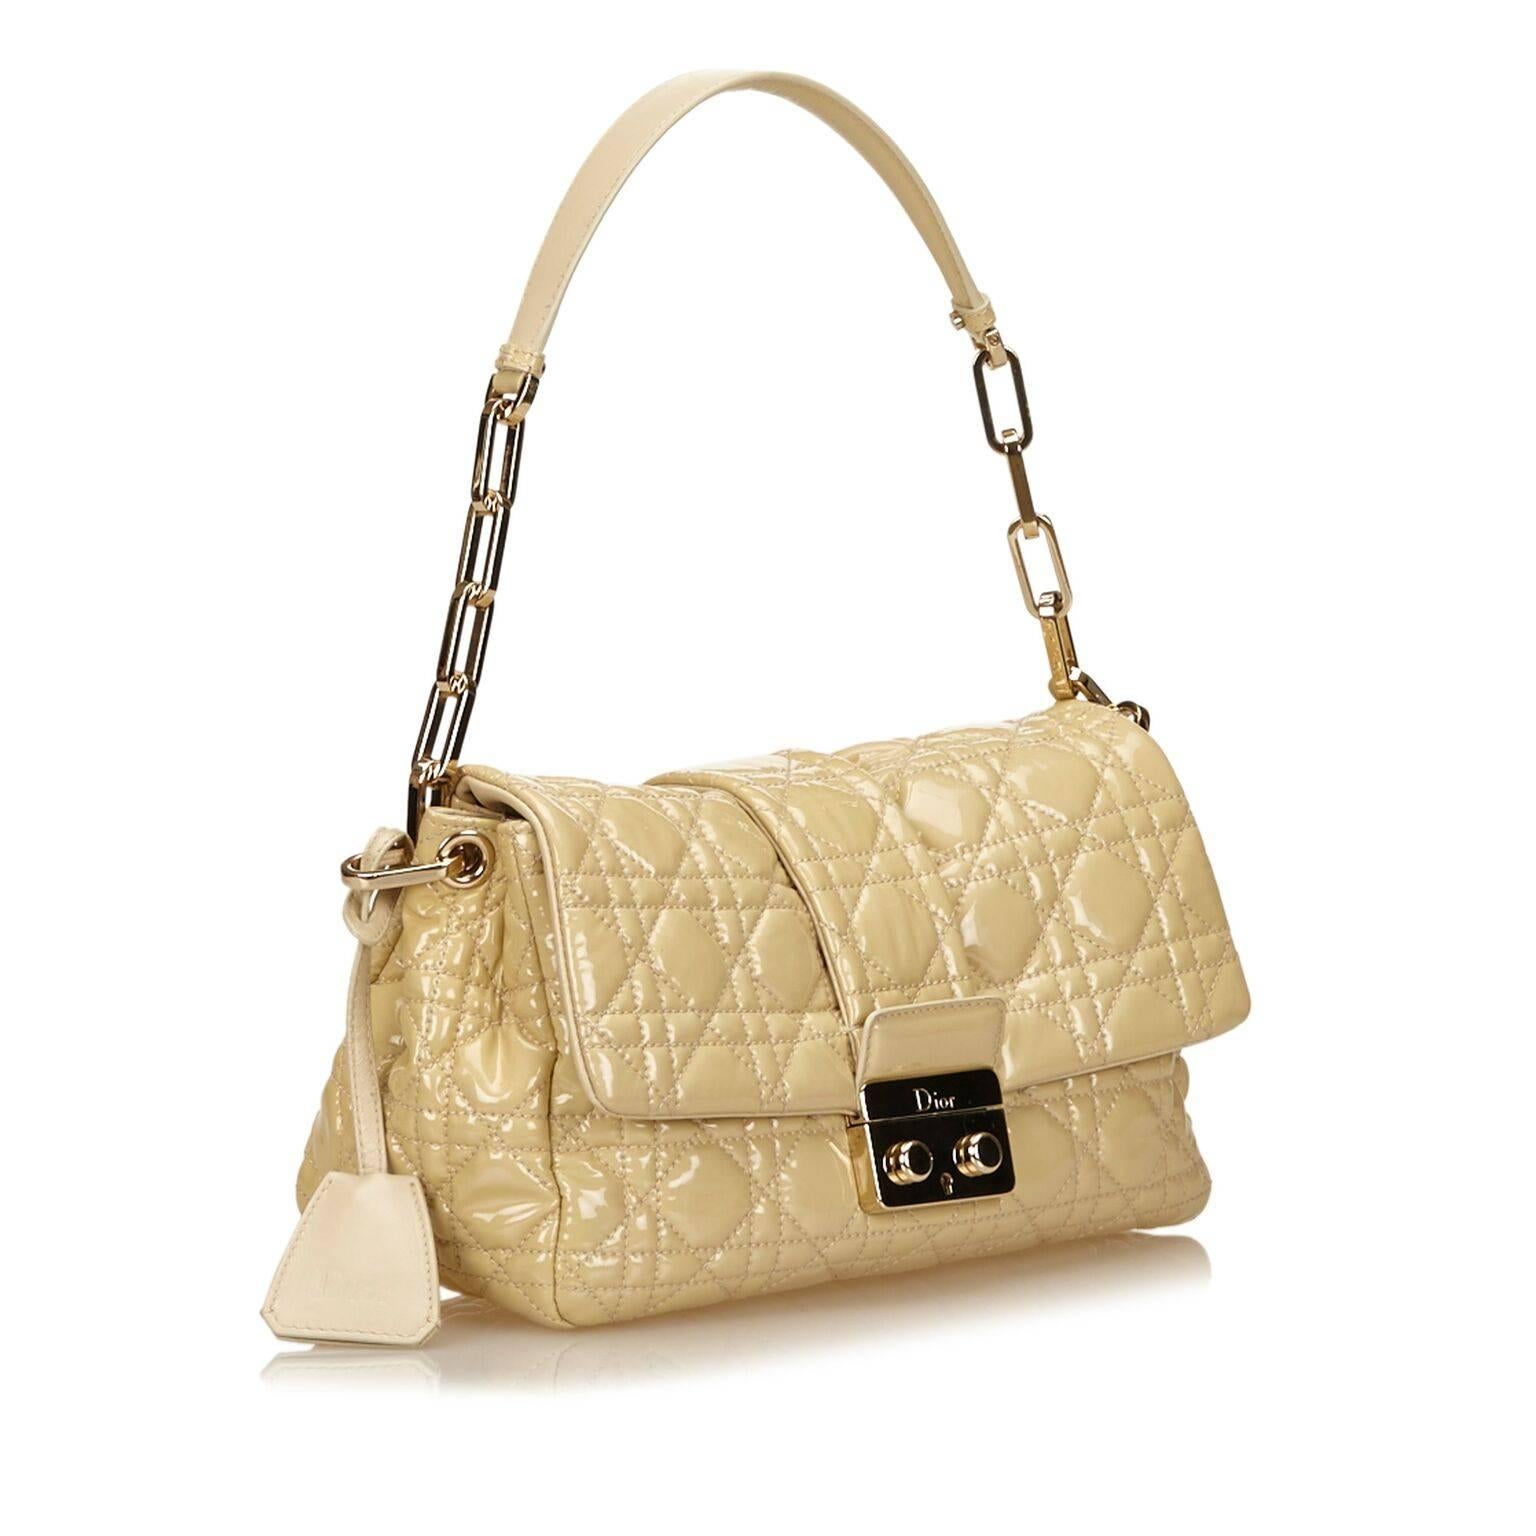 Product details:  Nude quilted patent leather Cannage shoulder bag by Christian Dior.  Single shoulder strap.  Front flap with lock-and-key push-lock closure.  Lined interior with inner zip pocket.  Goldtone hardware.  Authenticity card and dust bag